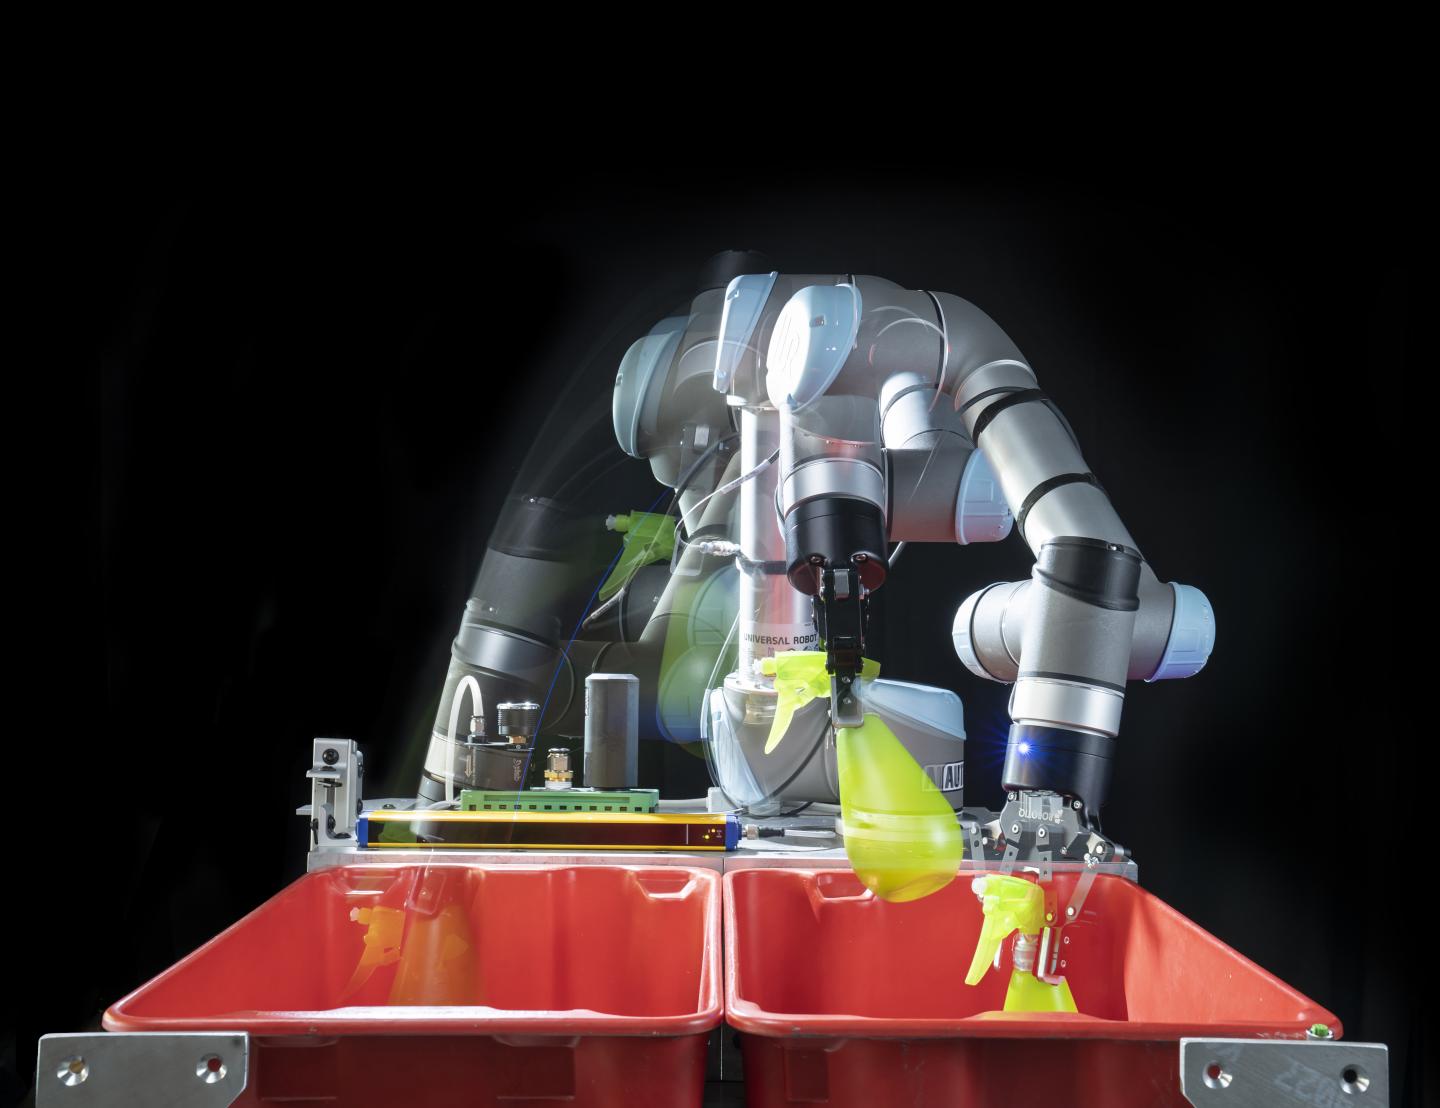 Robot grasping objects